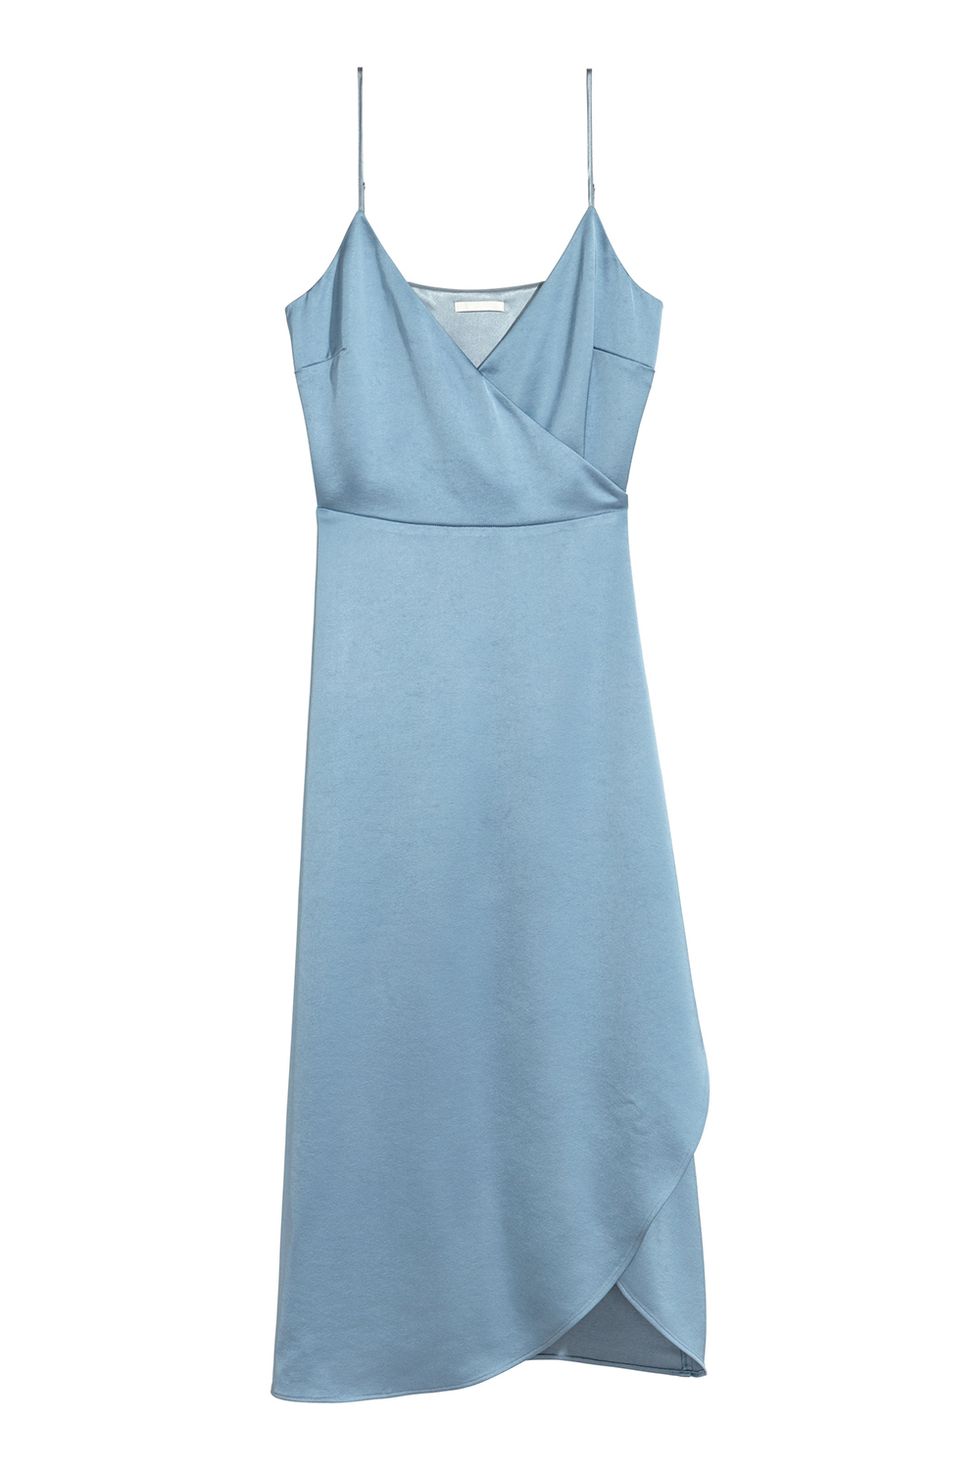 Clothing, Blue, Aqua, Turquoise, Day dress, Dress, Teal, camisoles, Cocktail dress, Neck, 